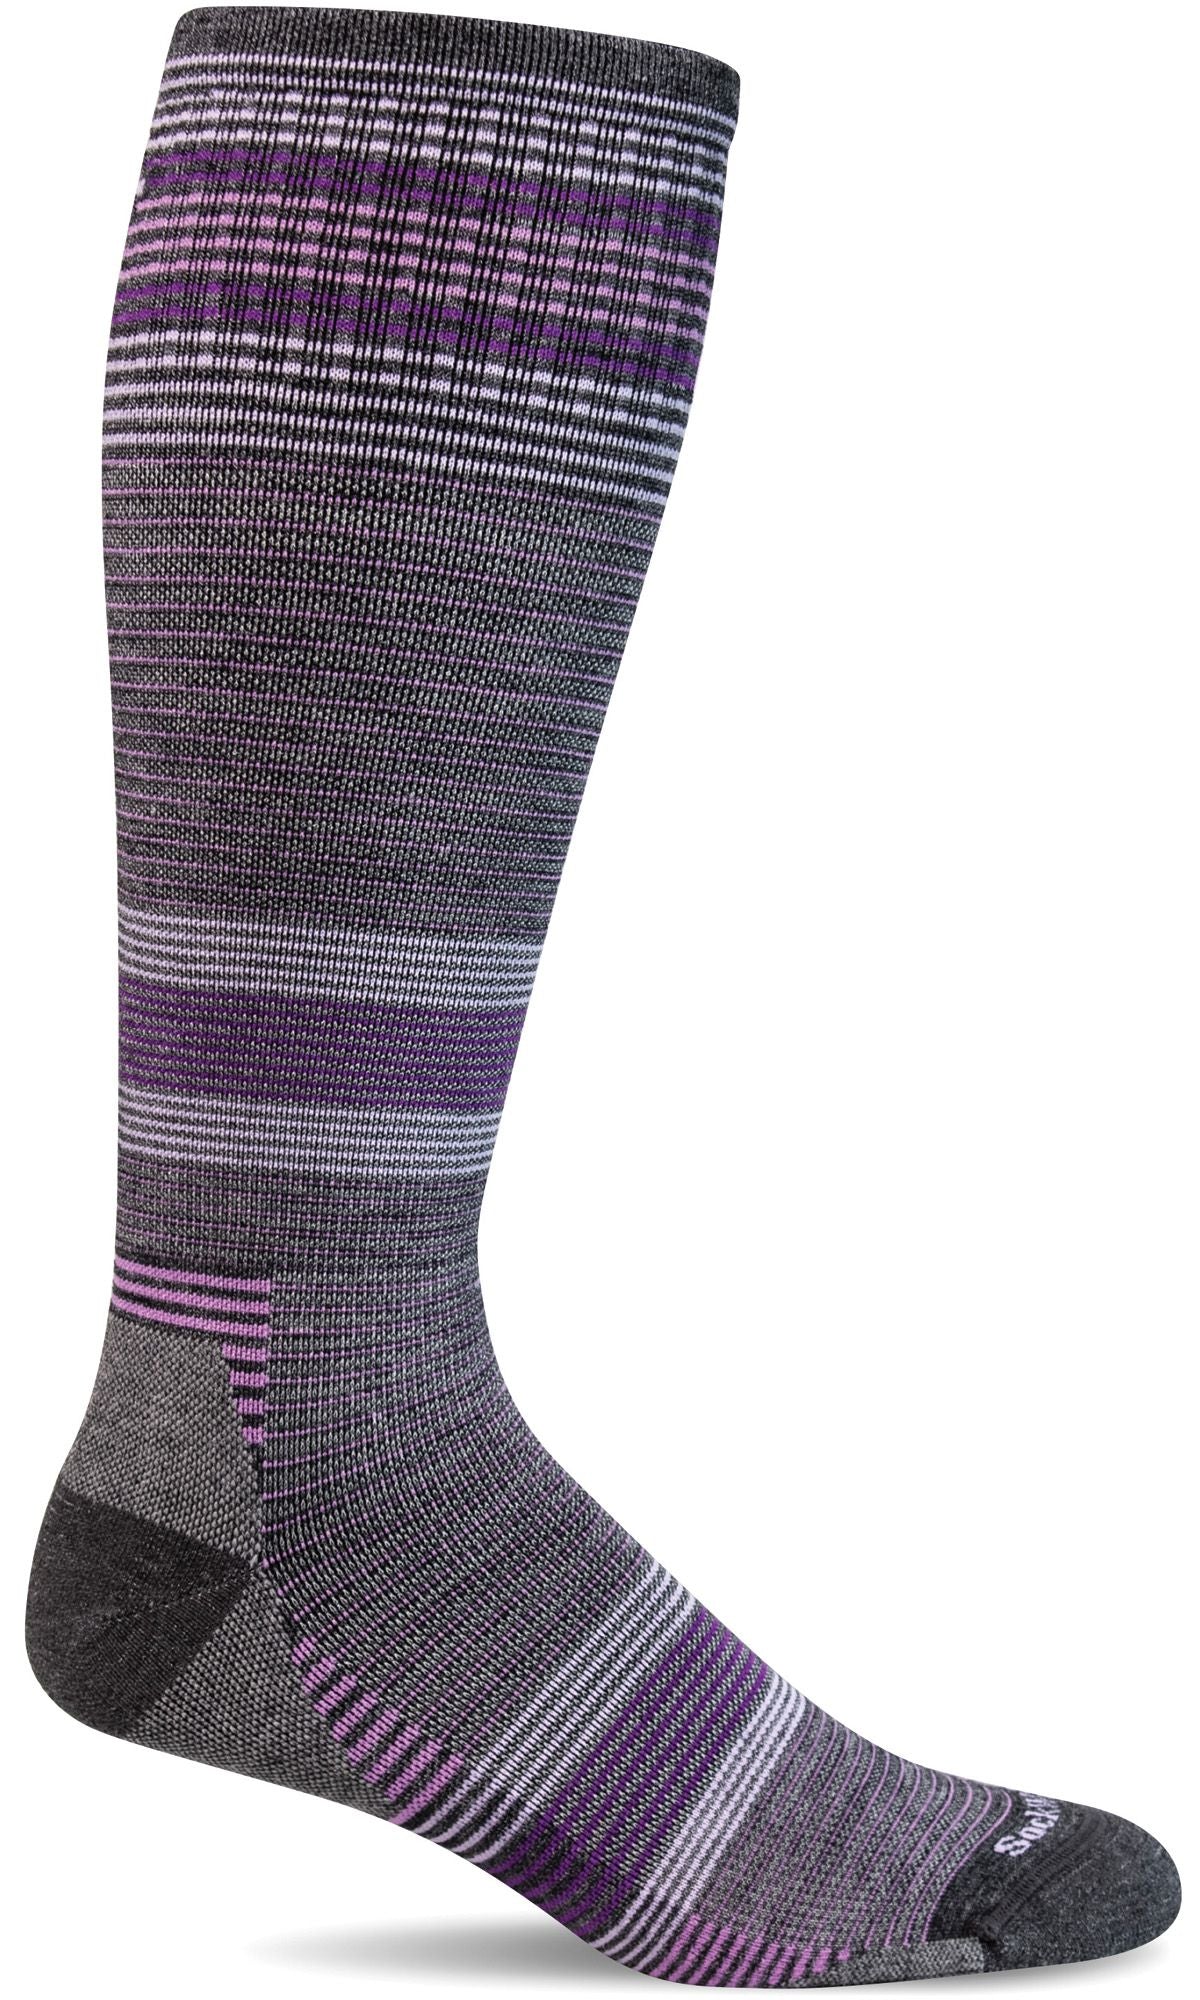 Sockwell Cadence Knee High Moderate Compression Socks (Women's)